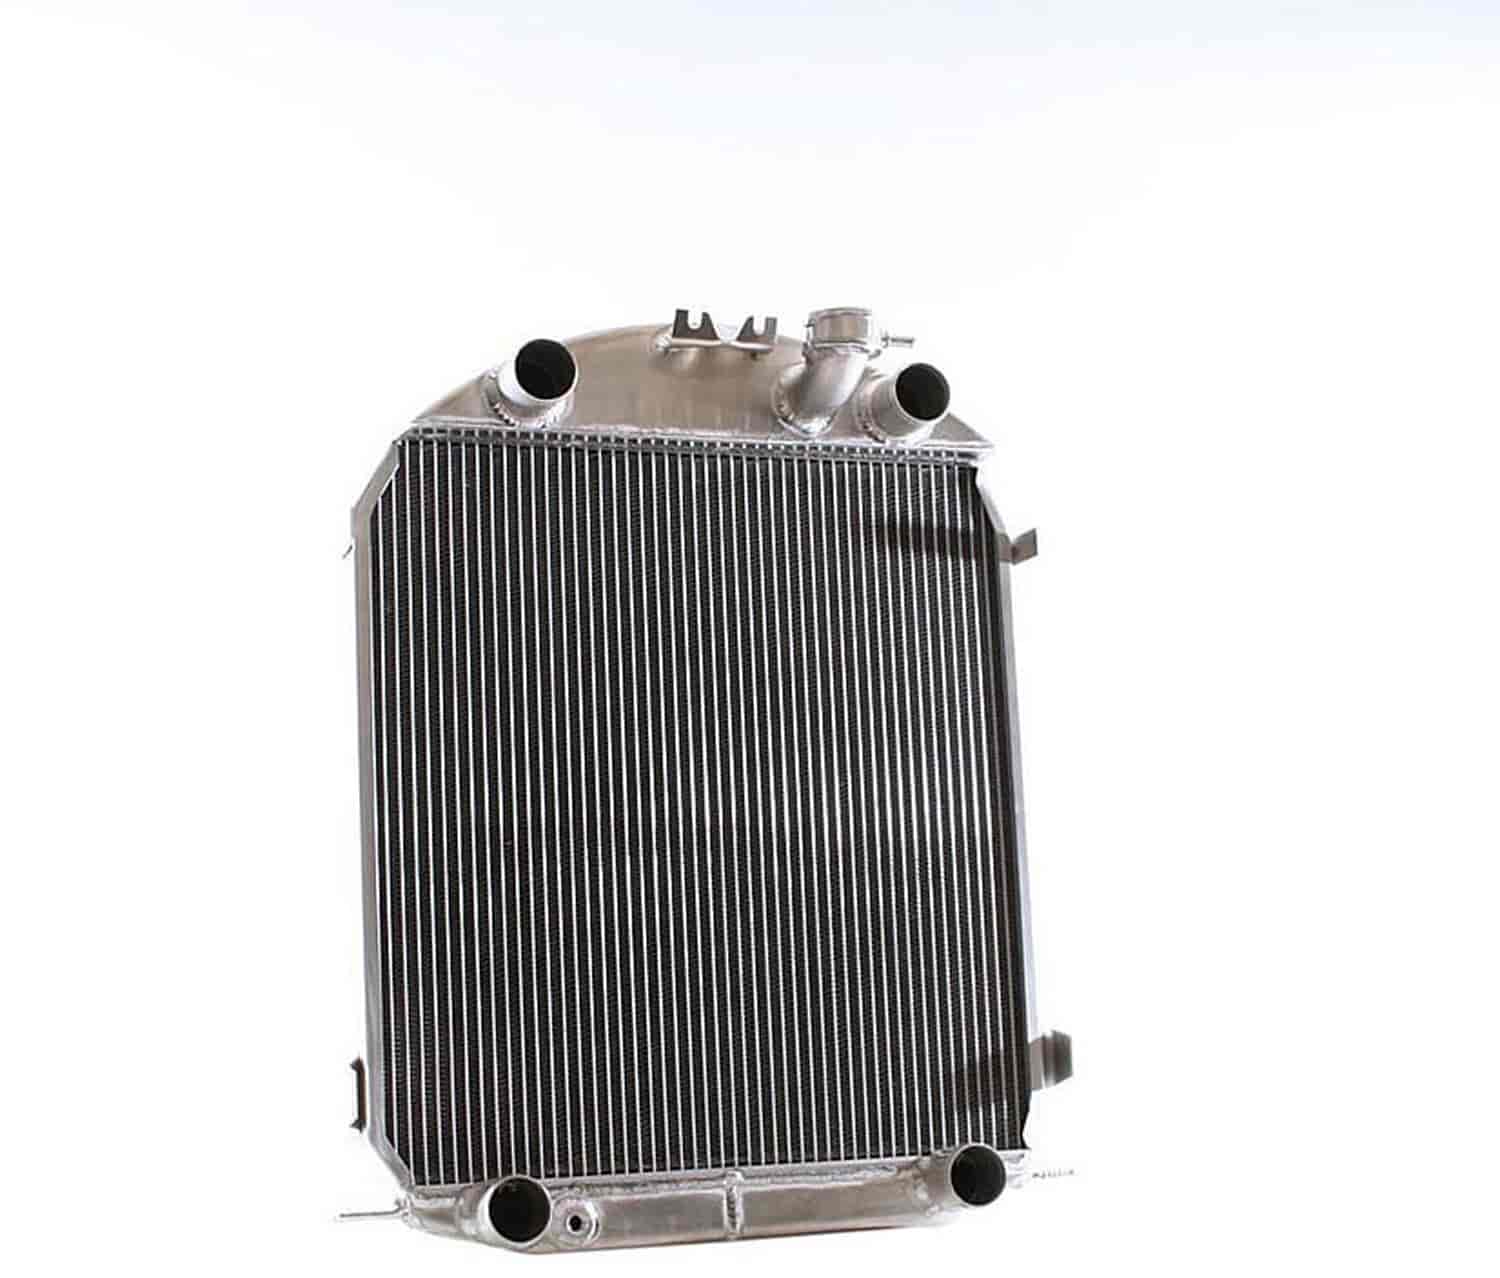 ExactFit Radiator for 1928-1929 Model A with Early Ford Flathead V8